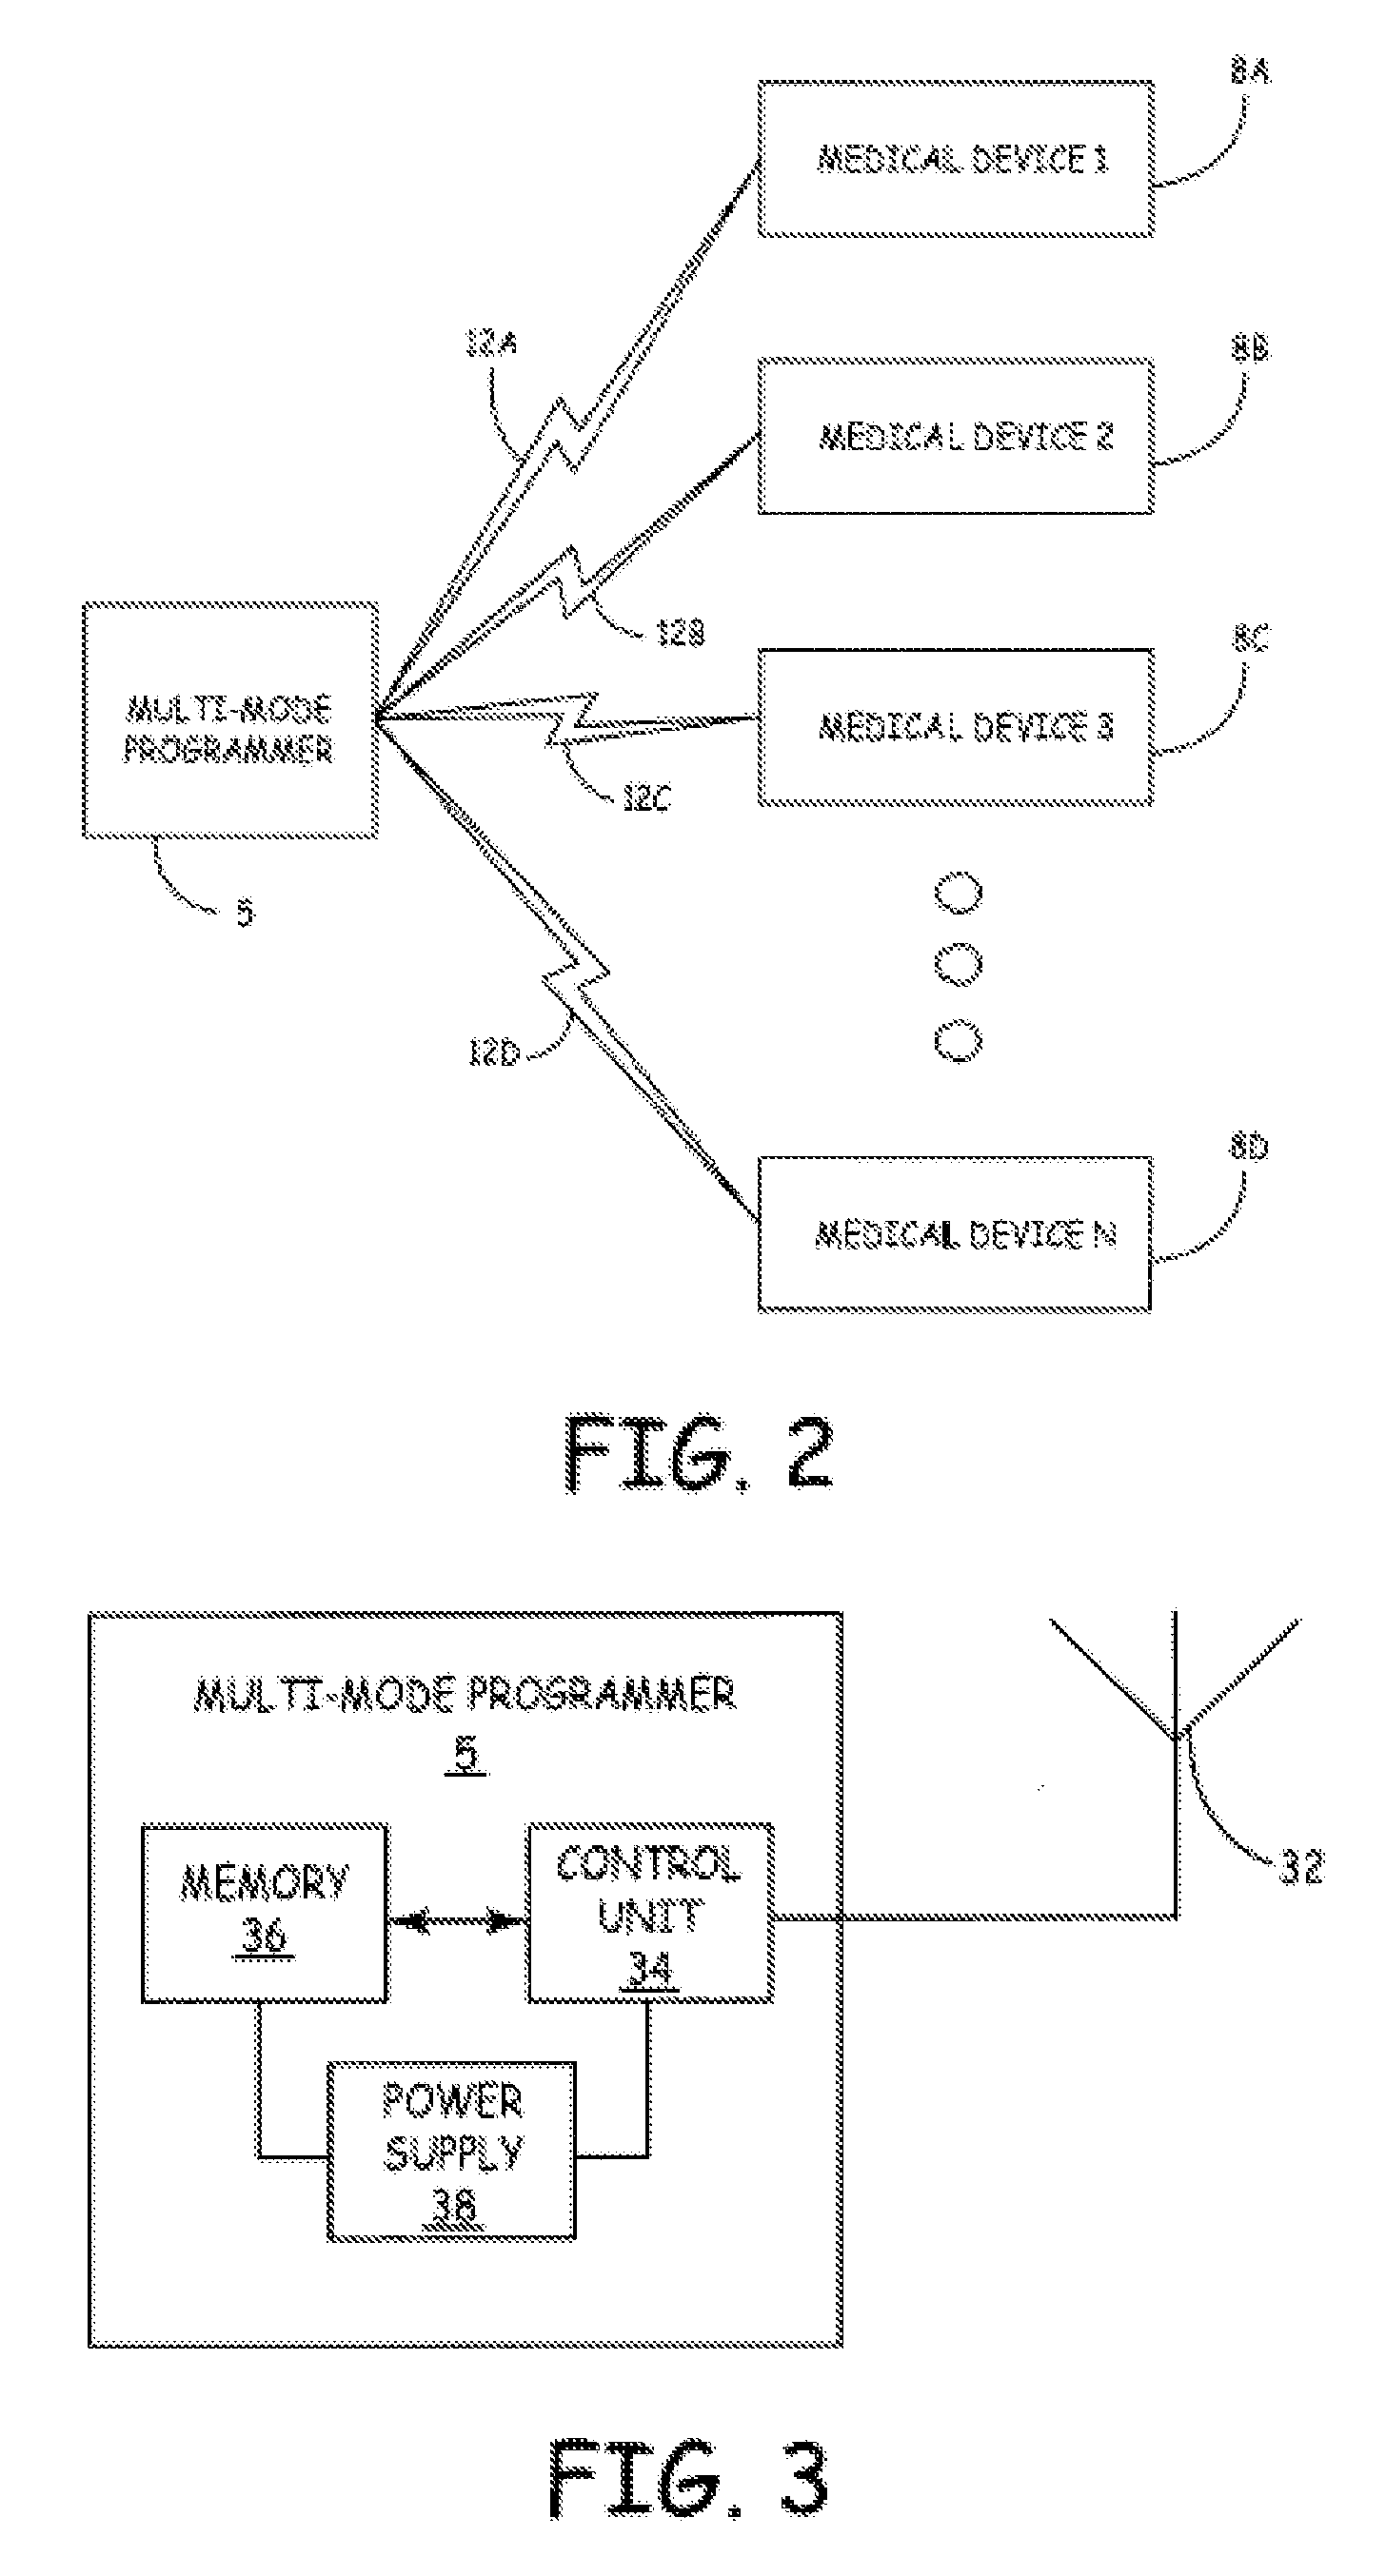 Multi-mode coordinator for medical device function